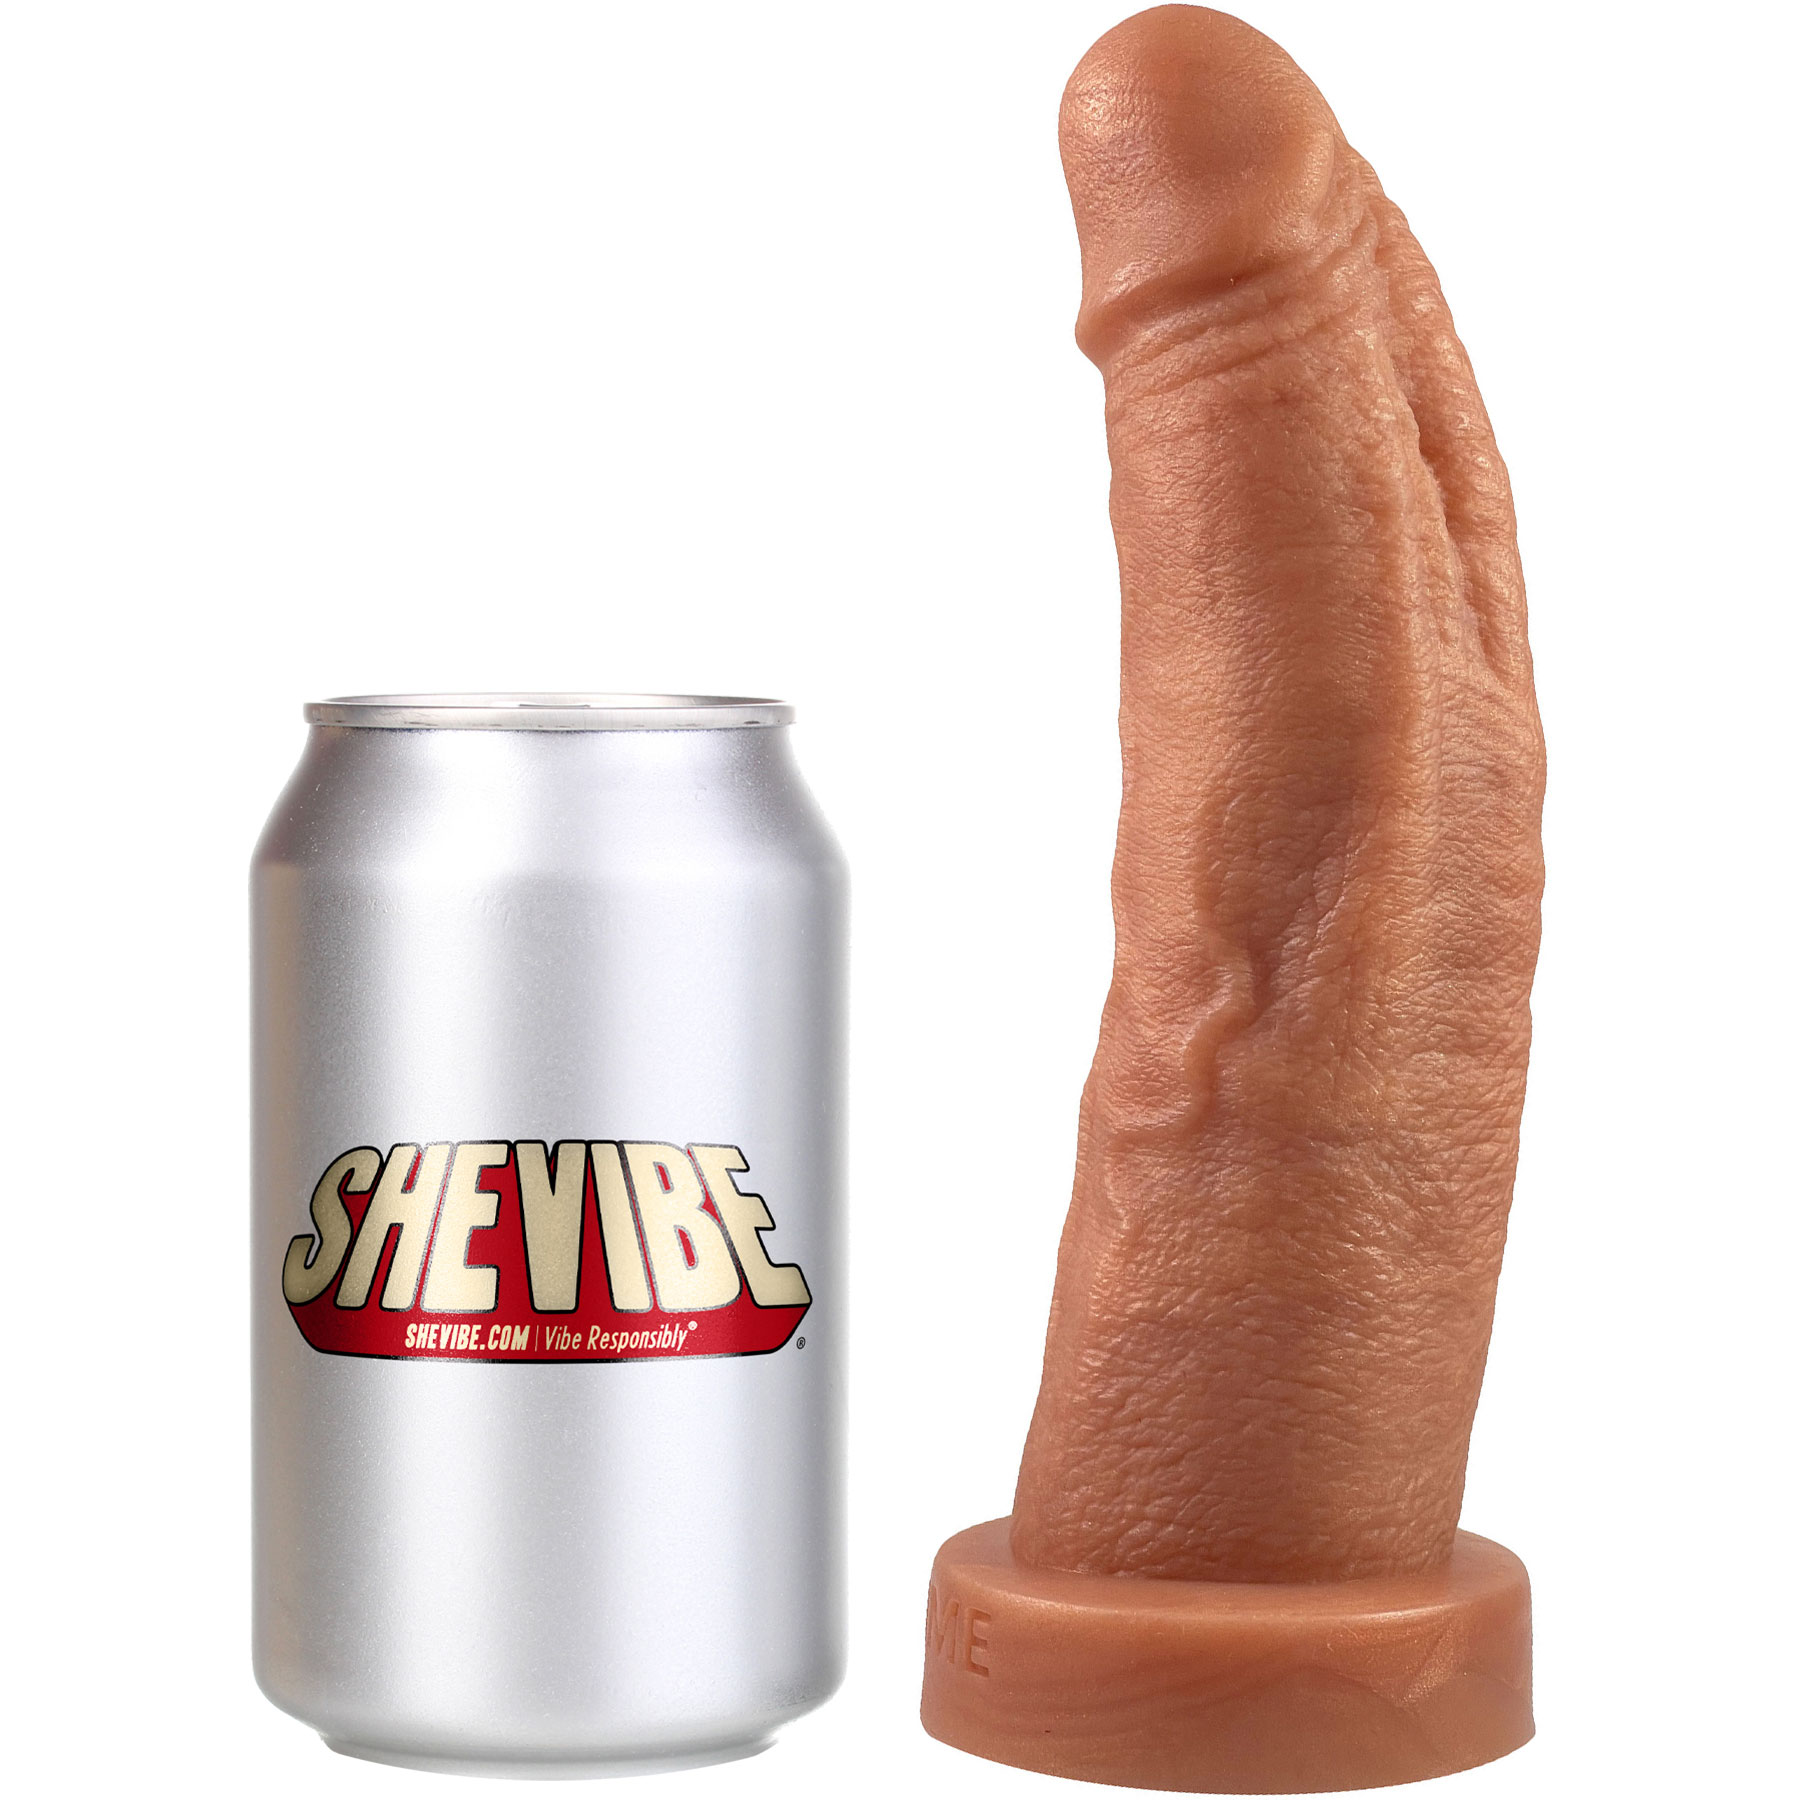 The Maximus Medium 8.25" Platinum Silicone Ultrarealistic Dildo By Uberrime - With Can For Size Reference